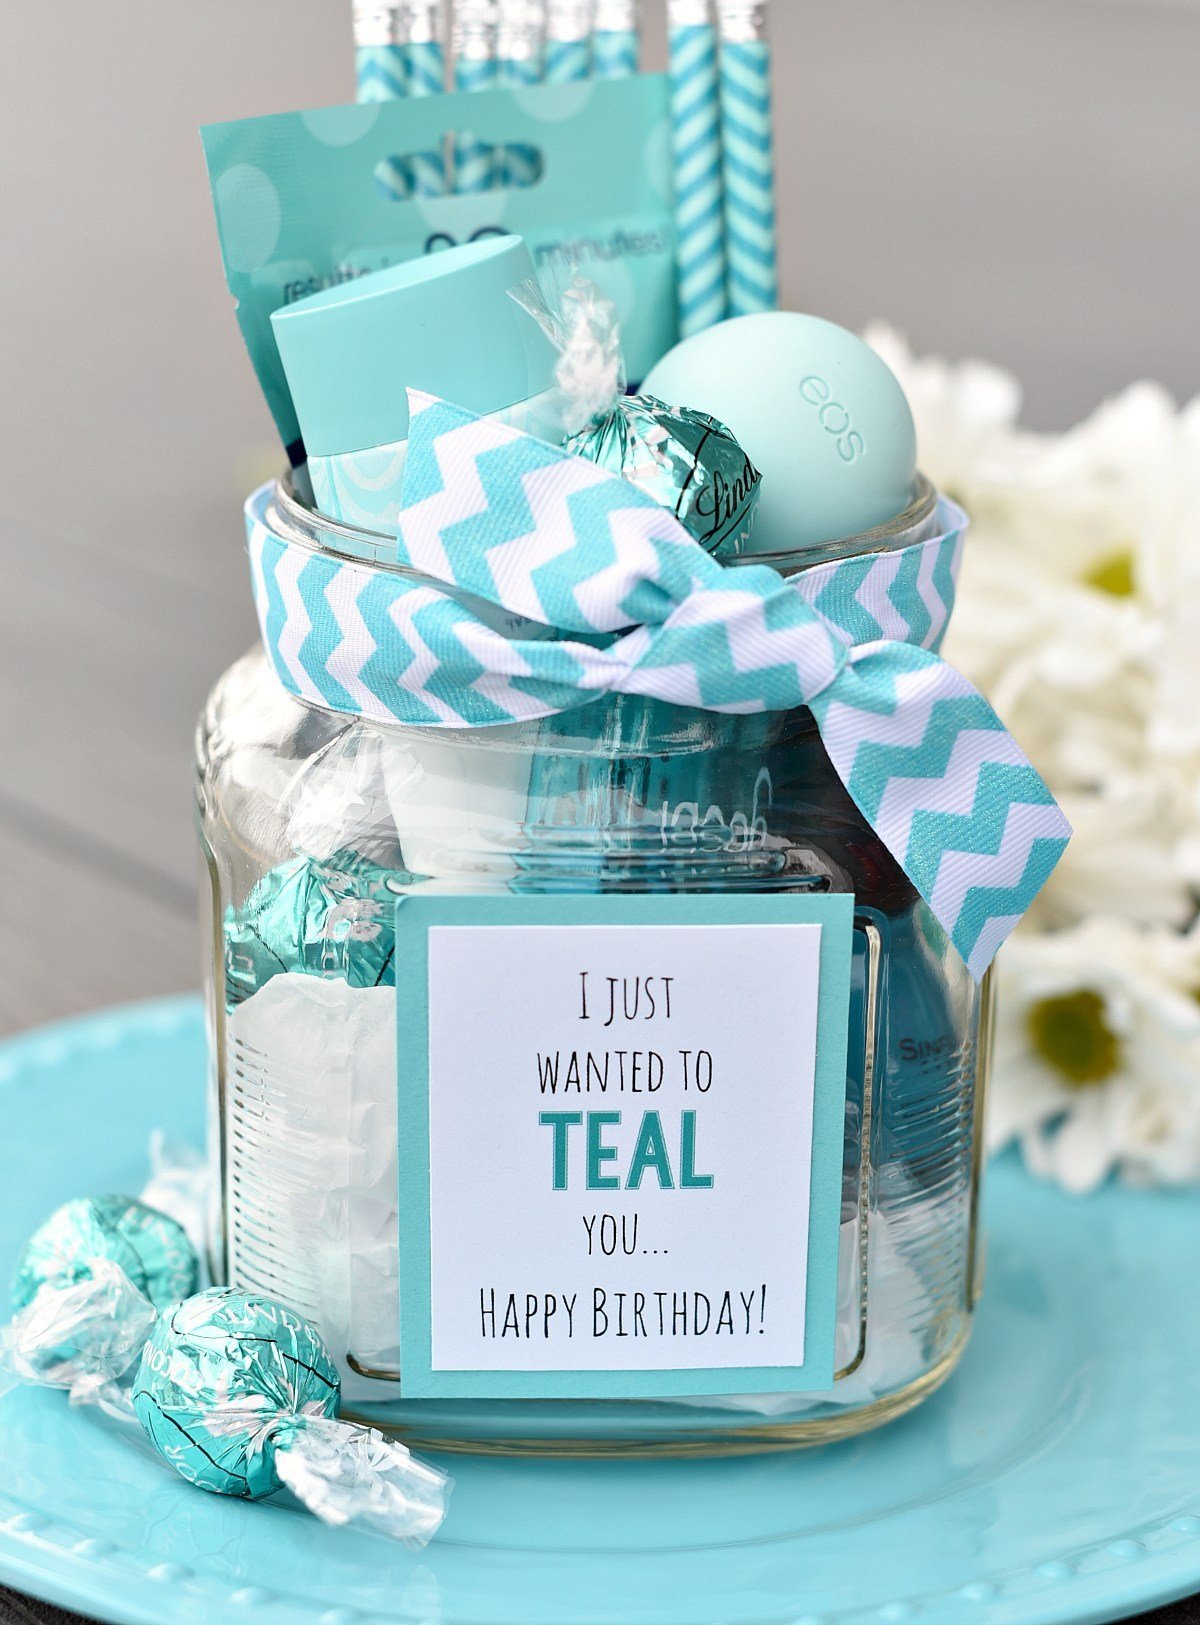 Teal-Themed Birthday Gift for a Friend